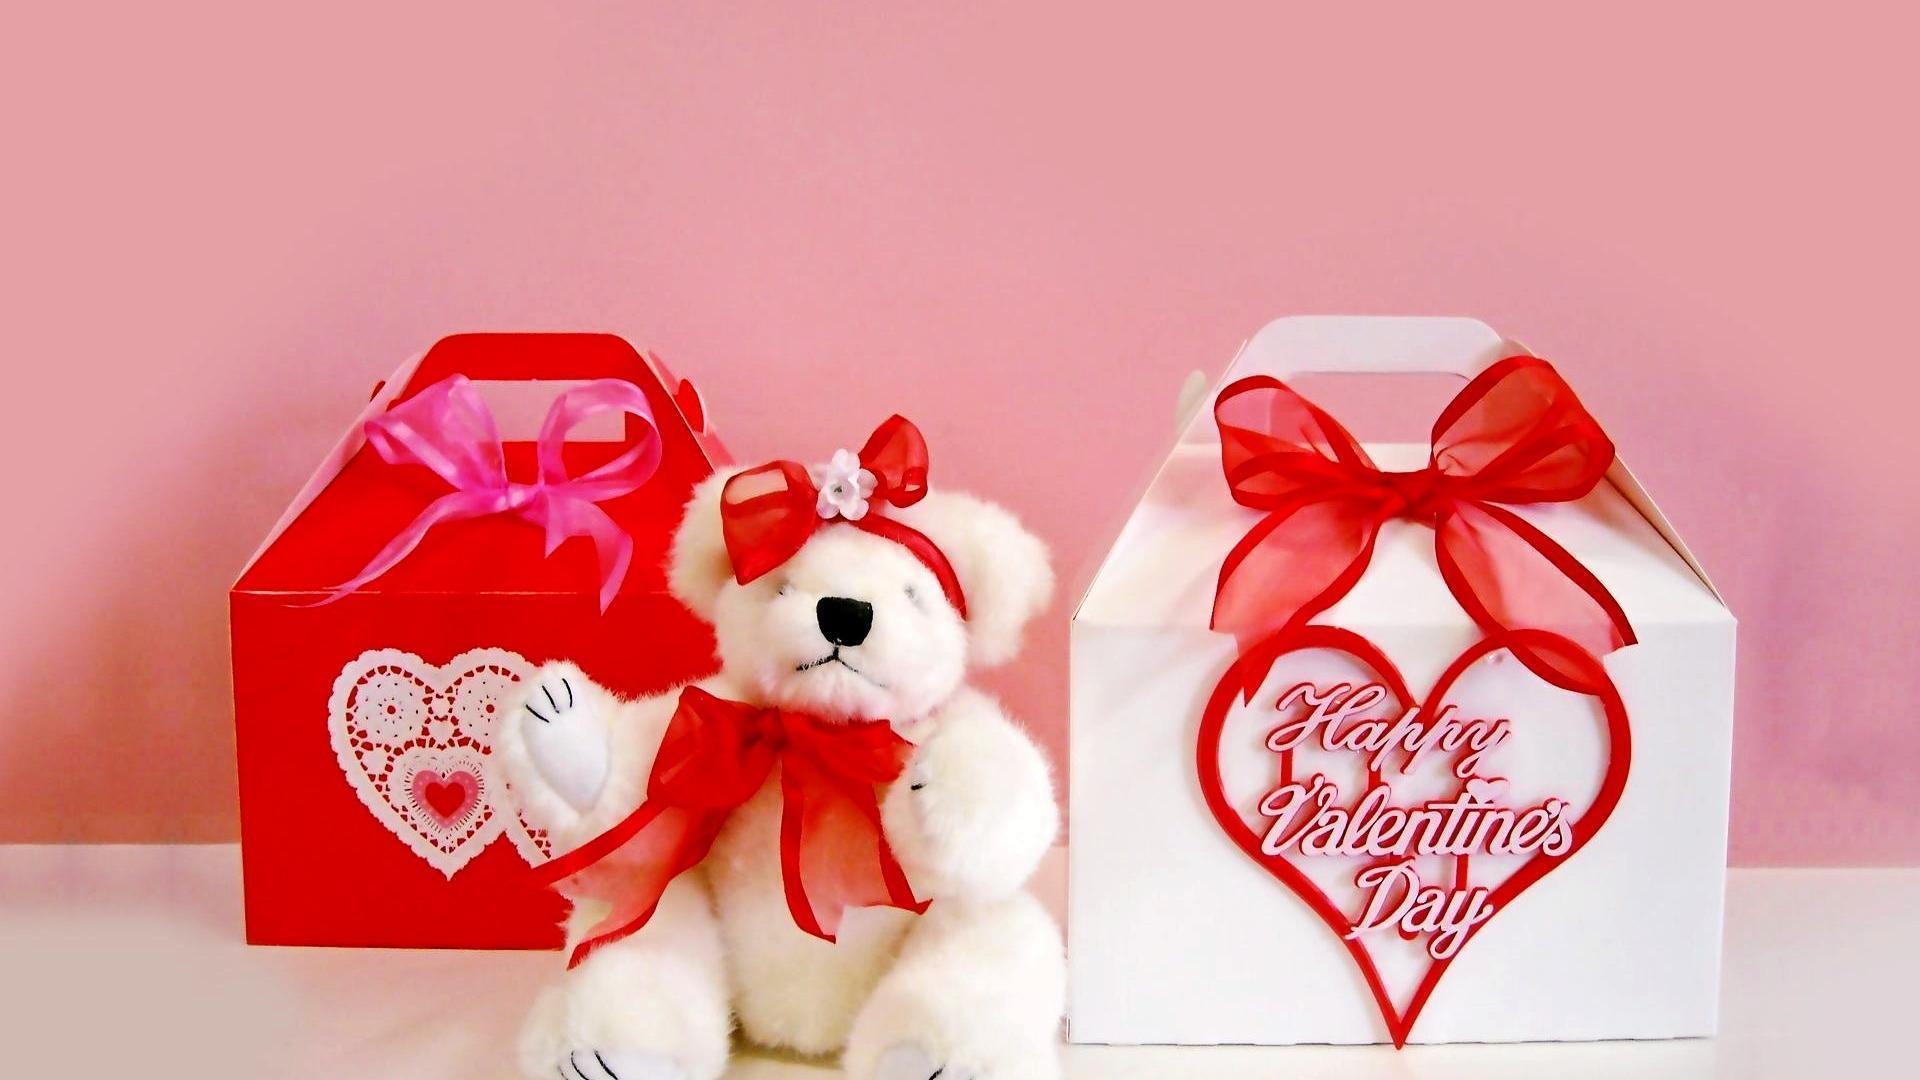 Happy Valentines Day Gifts Full HD Wallpaper Wallpaper